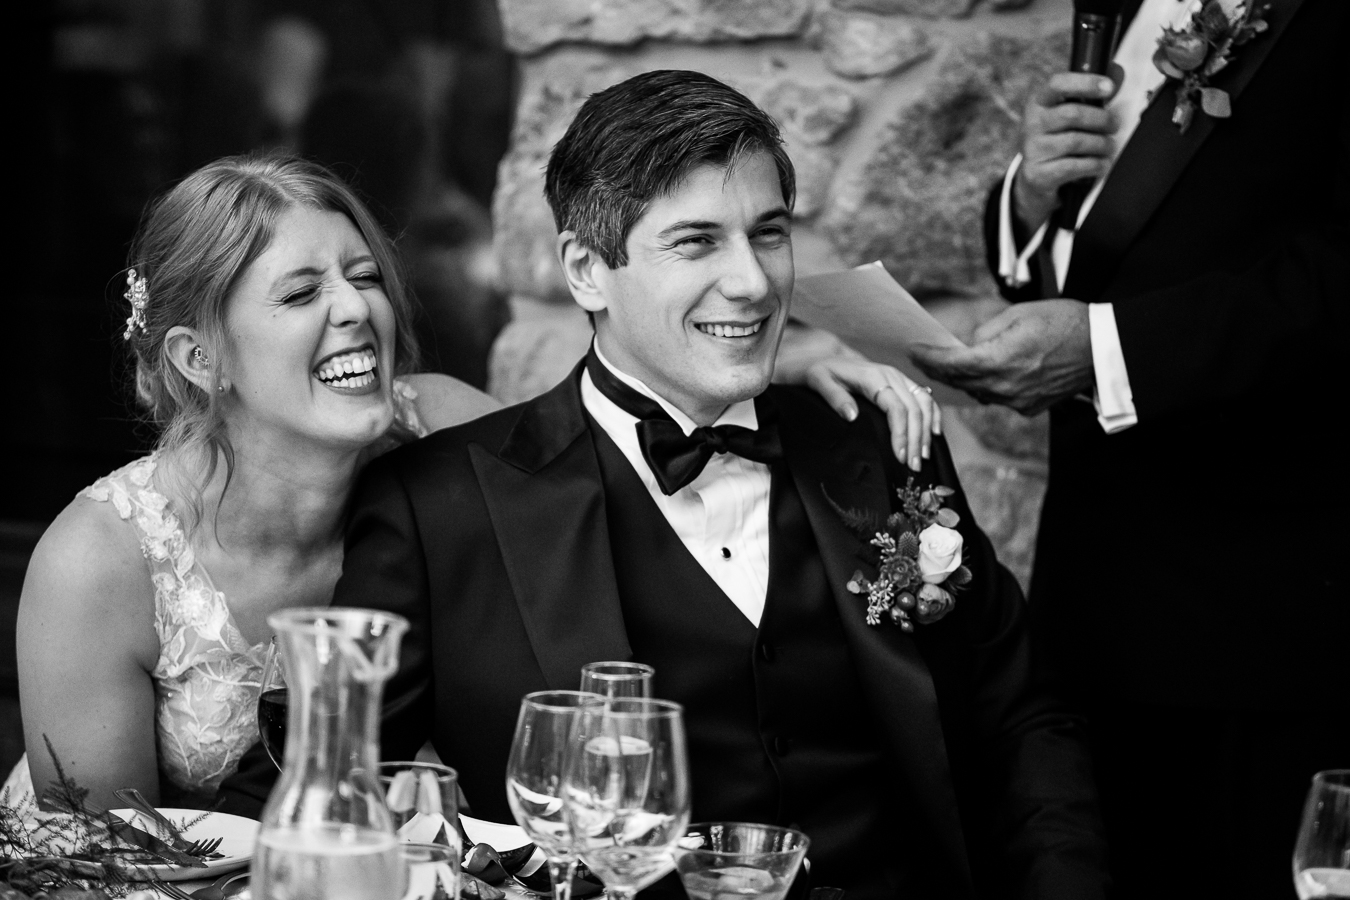 black and white image of the bride and groom as they smiles and listen to their friends and family giving speeches at this fun wedding reception 